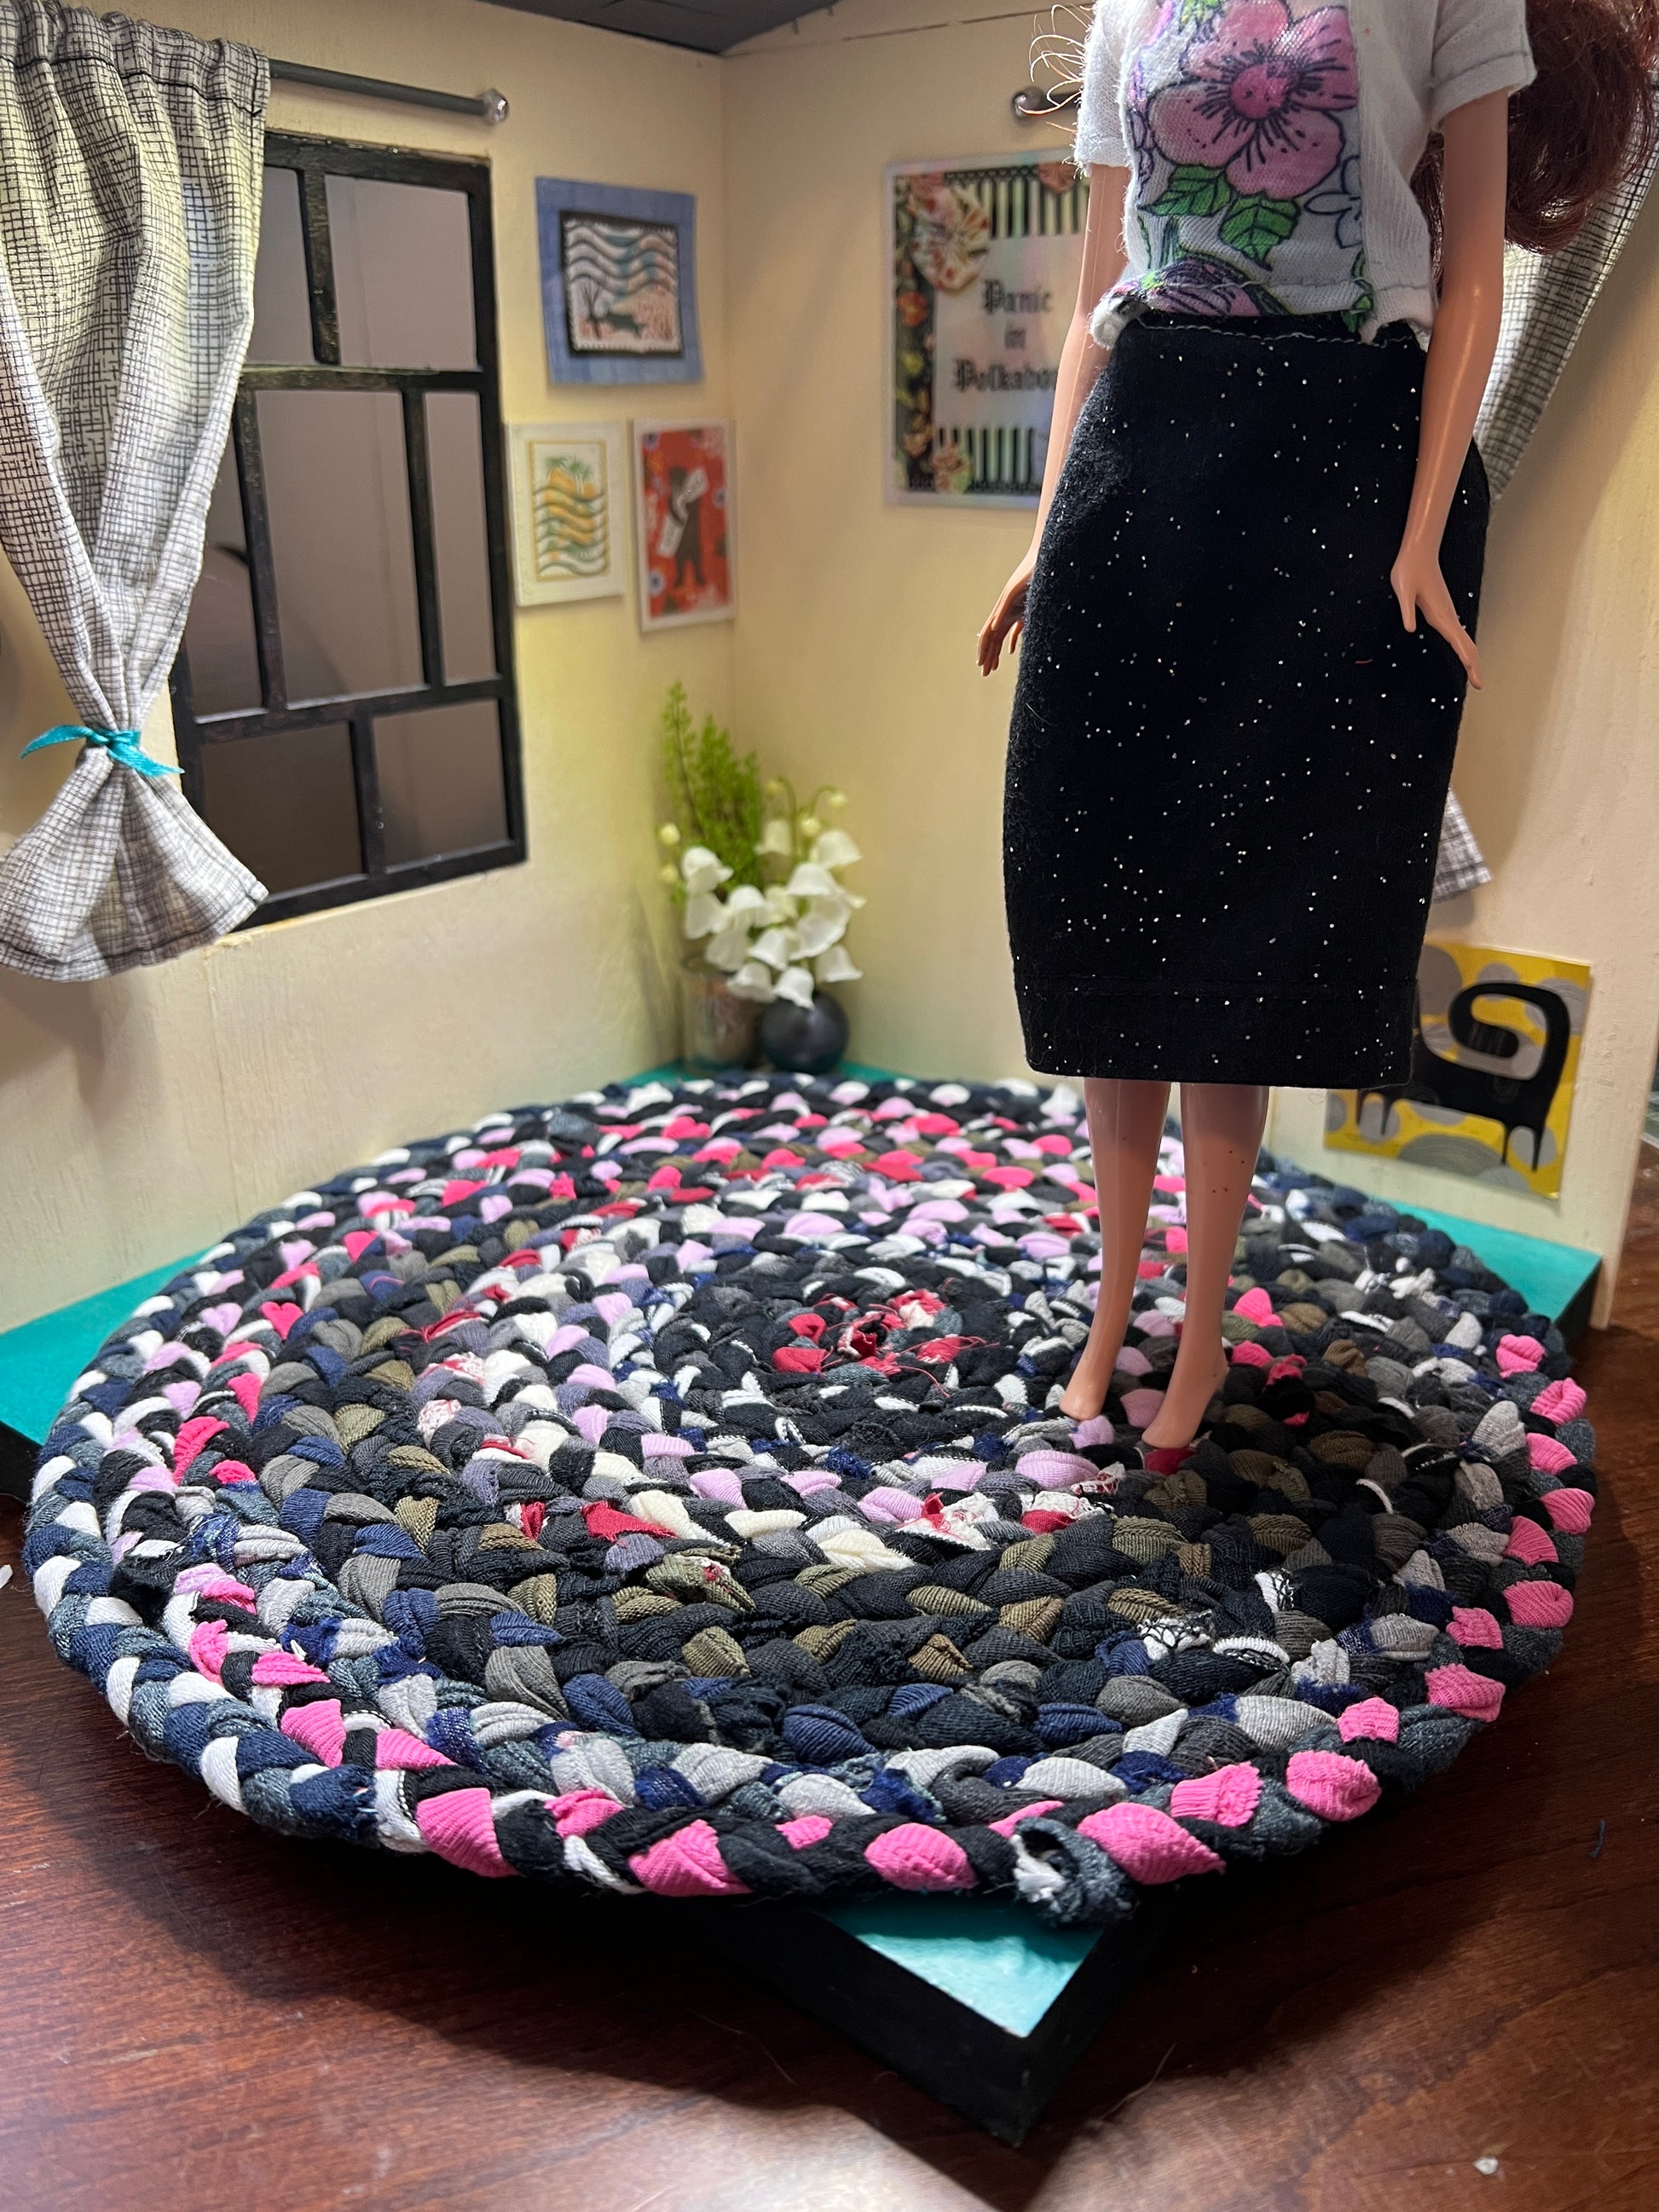 view of miniature rug in a room box, with Barbie standing atop the 11" pink black white rug for scale and display ideas